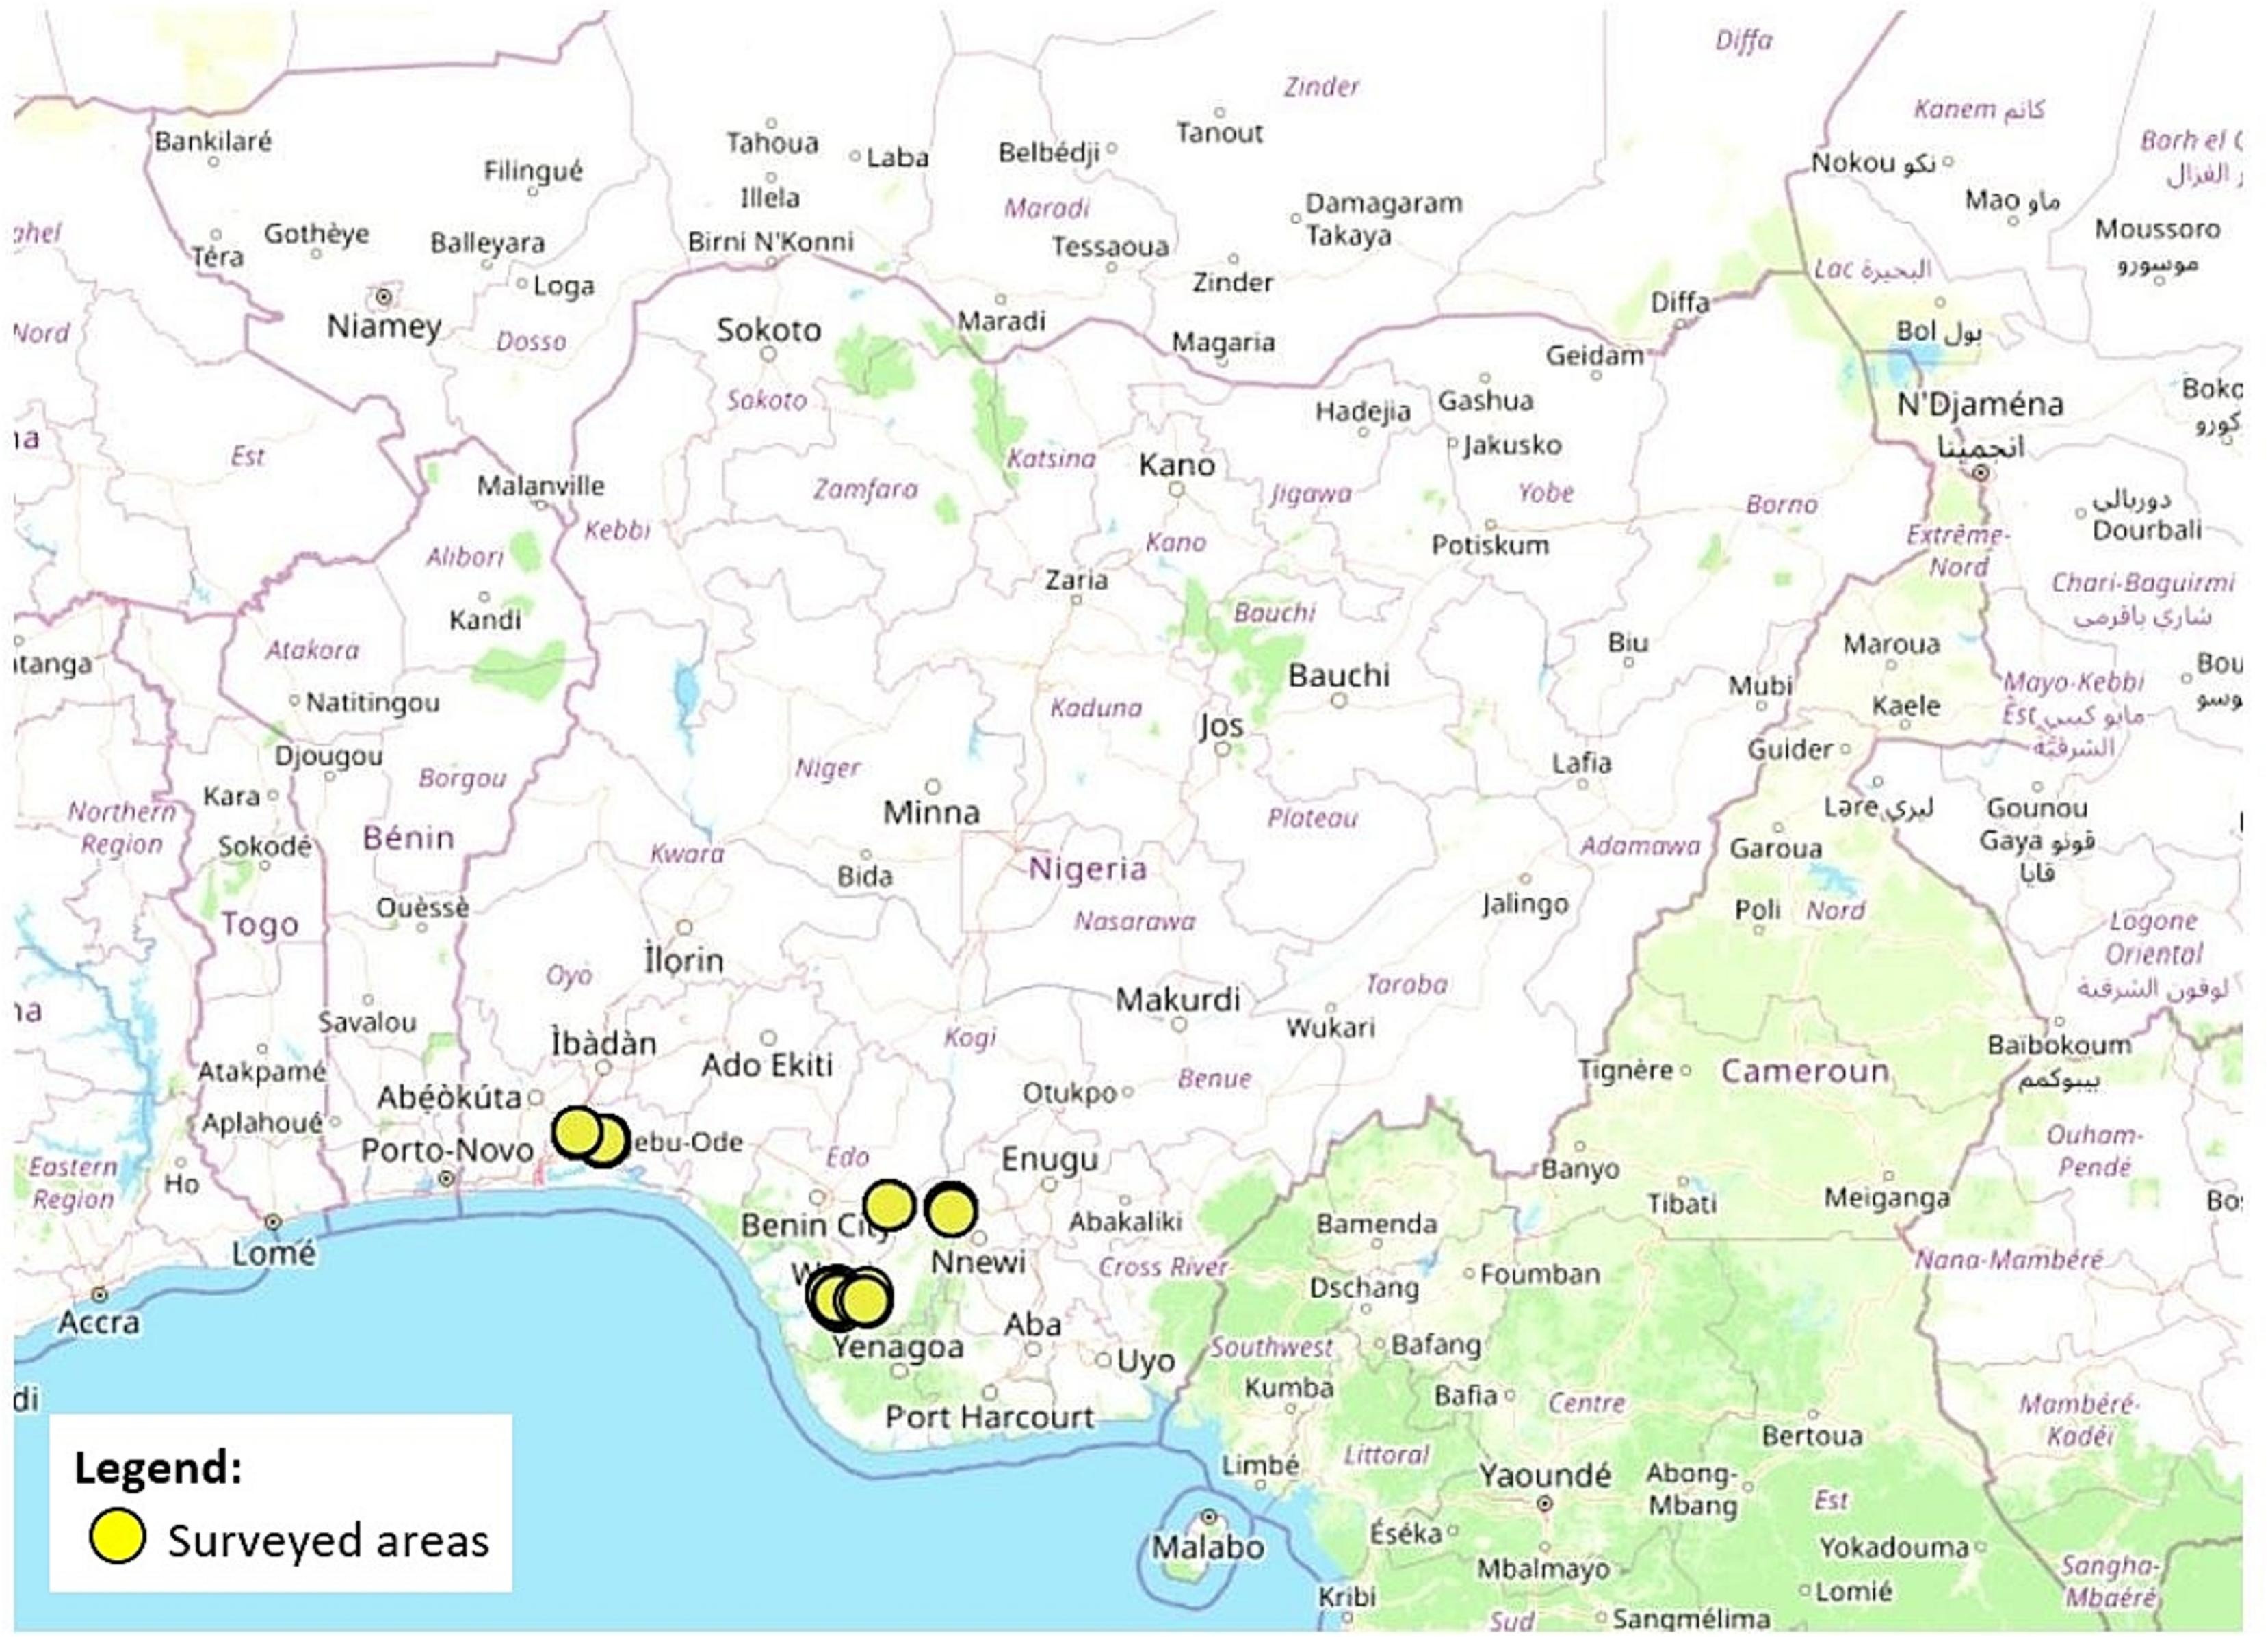  A map with locations of sites surveyed using the Fish Epidemiology and Health Economics tool (version 1.13) in Ogun and Delta States, Nigeria.